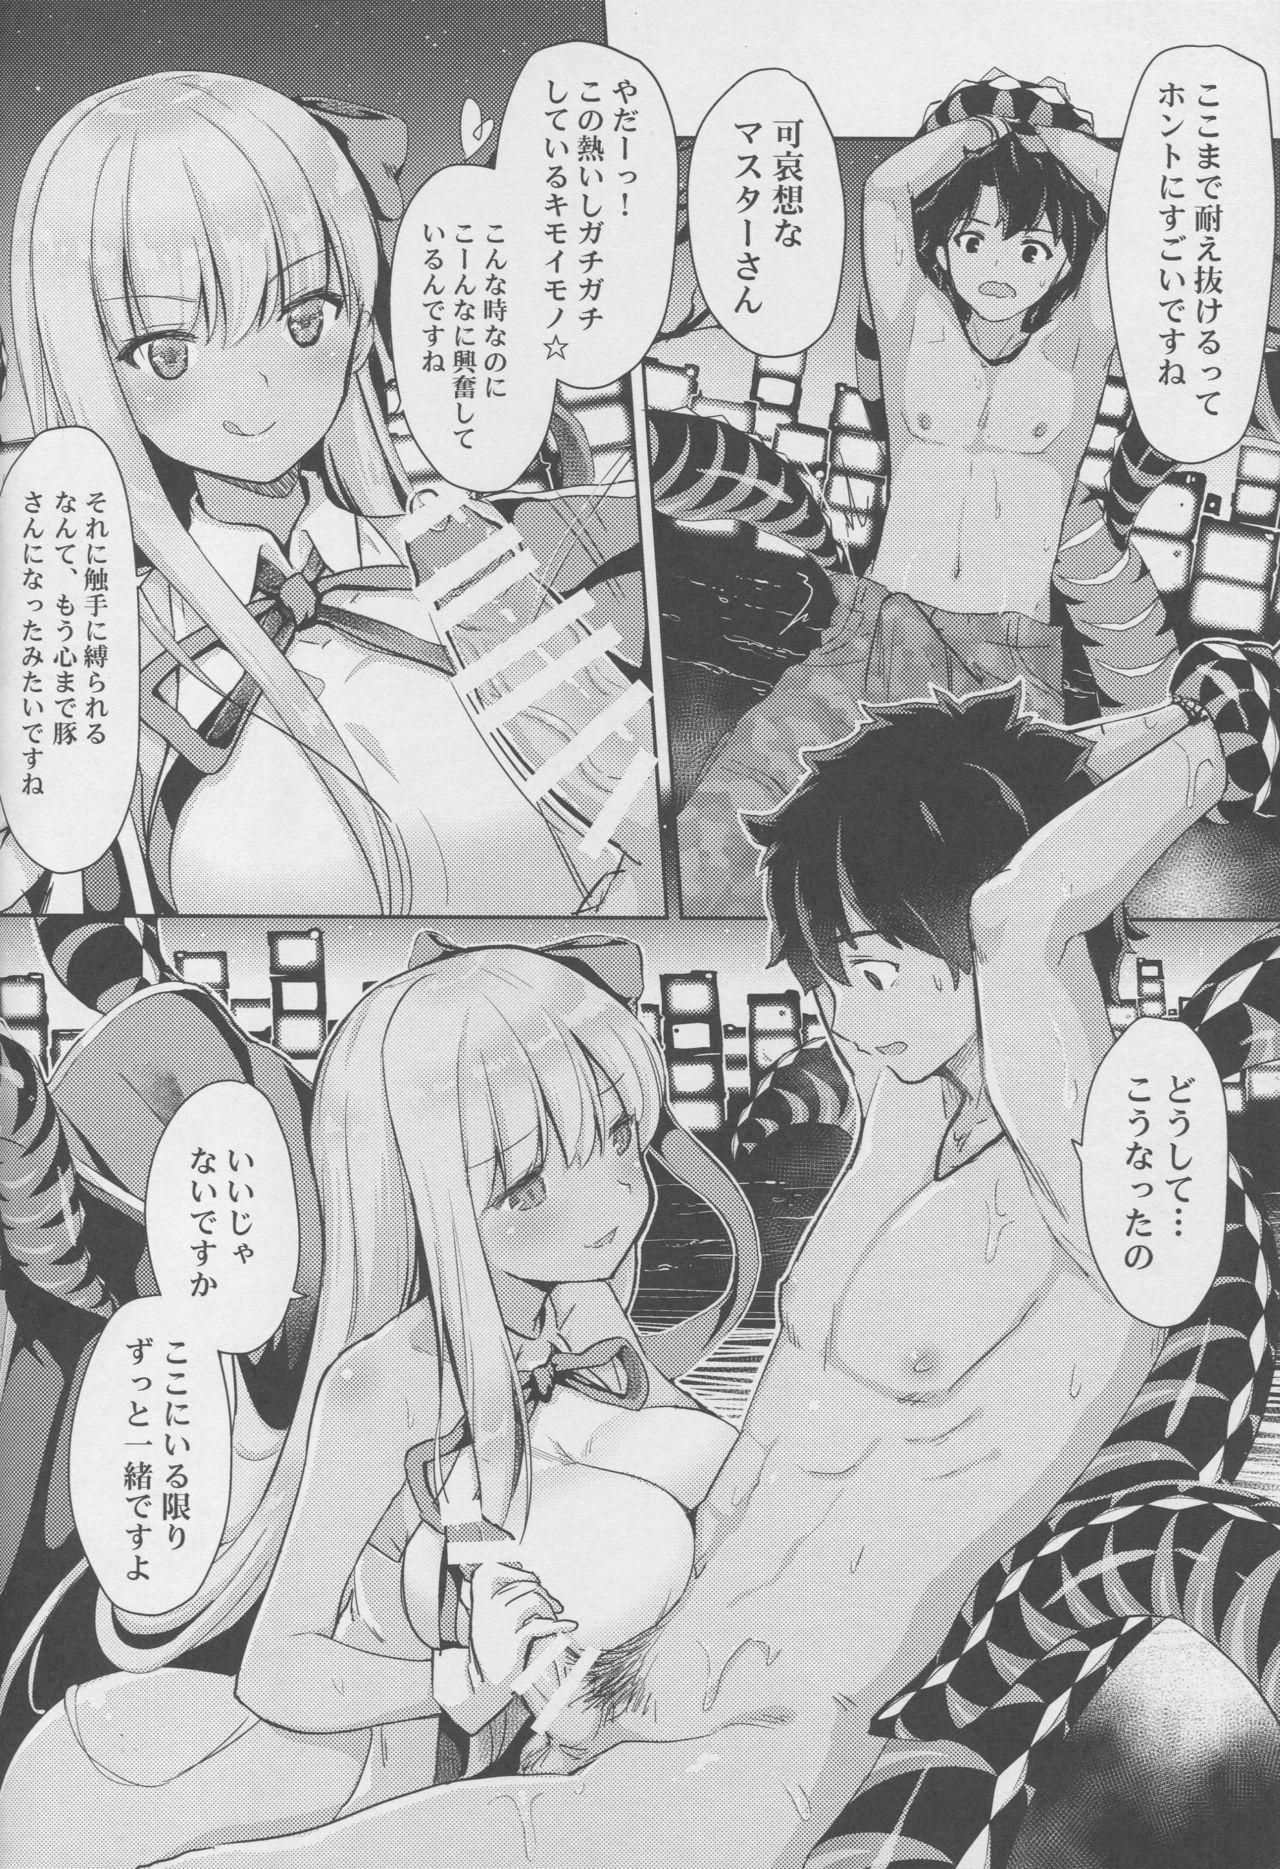 Best Blowjob Ever BB-chan no Chotto dake Ookii na ITAZURA - Fate grand order Bubble - Page 5